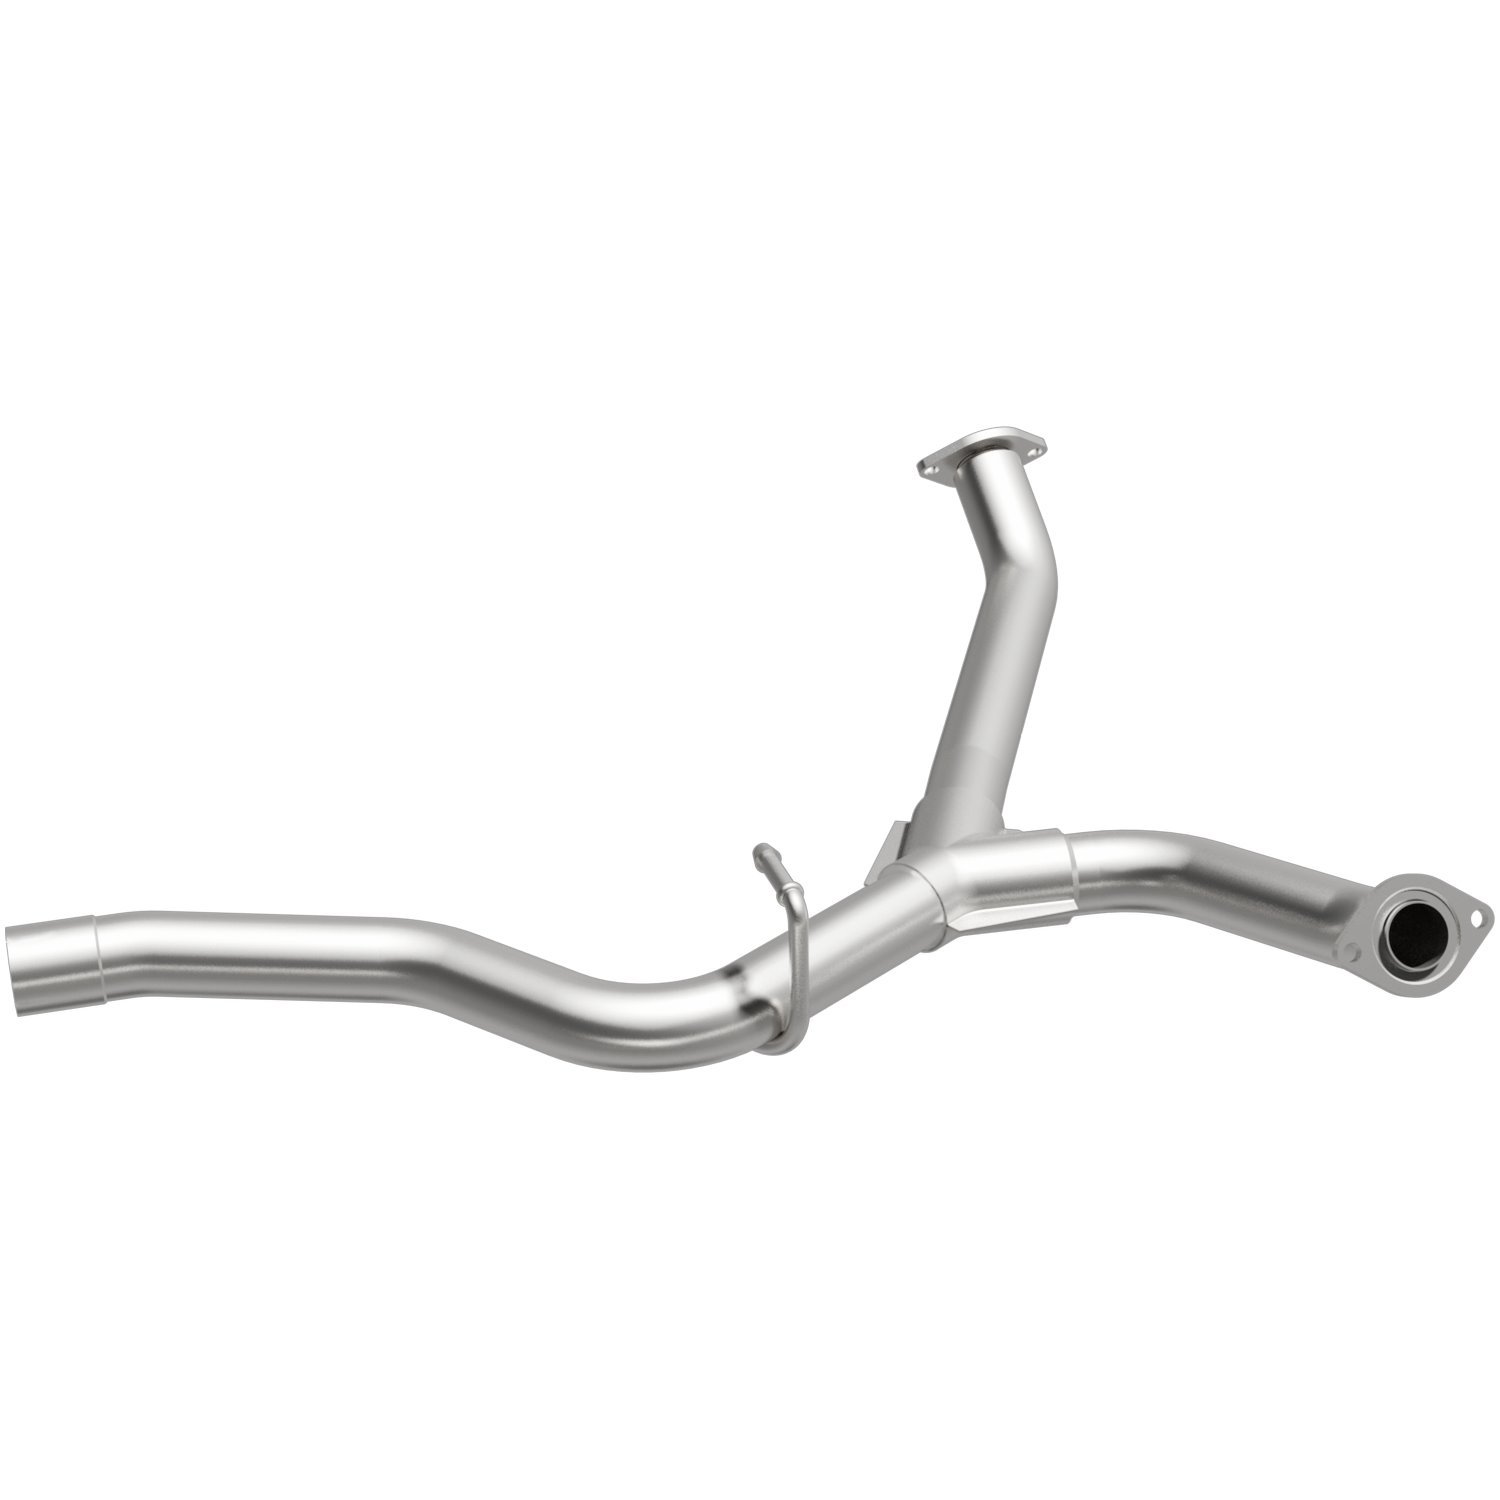 Direct-Fit Exhaust Y-Pipe, 2008-2013 Subaru Forester/Impreza 2.5L